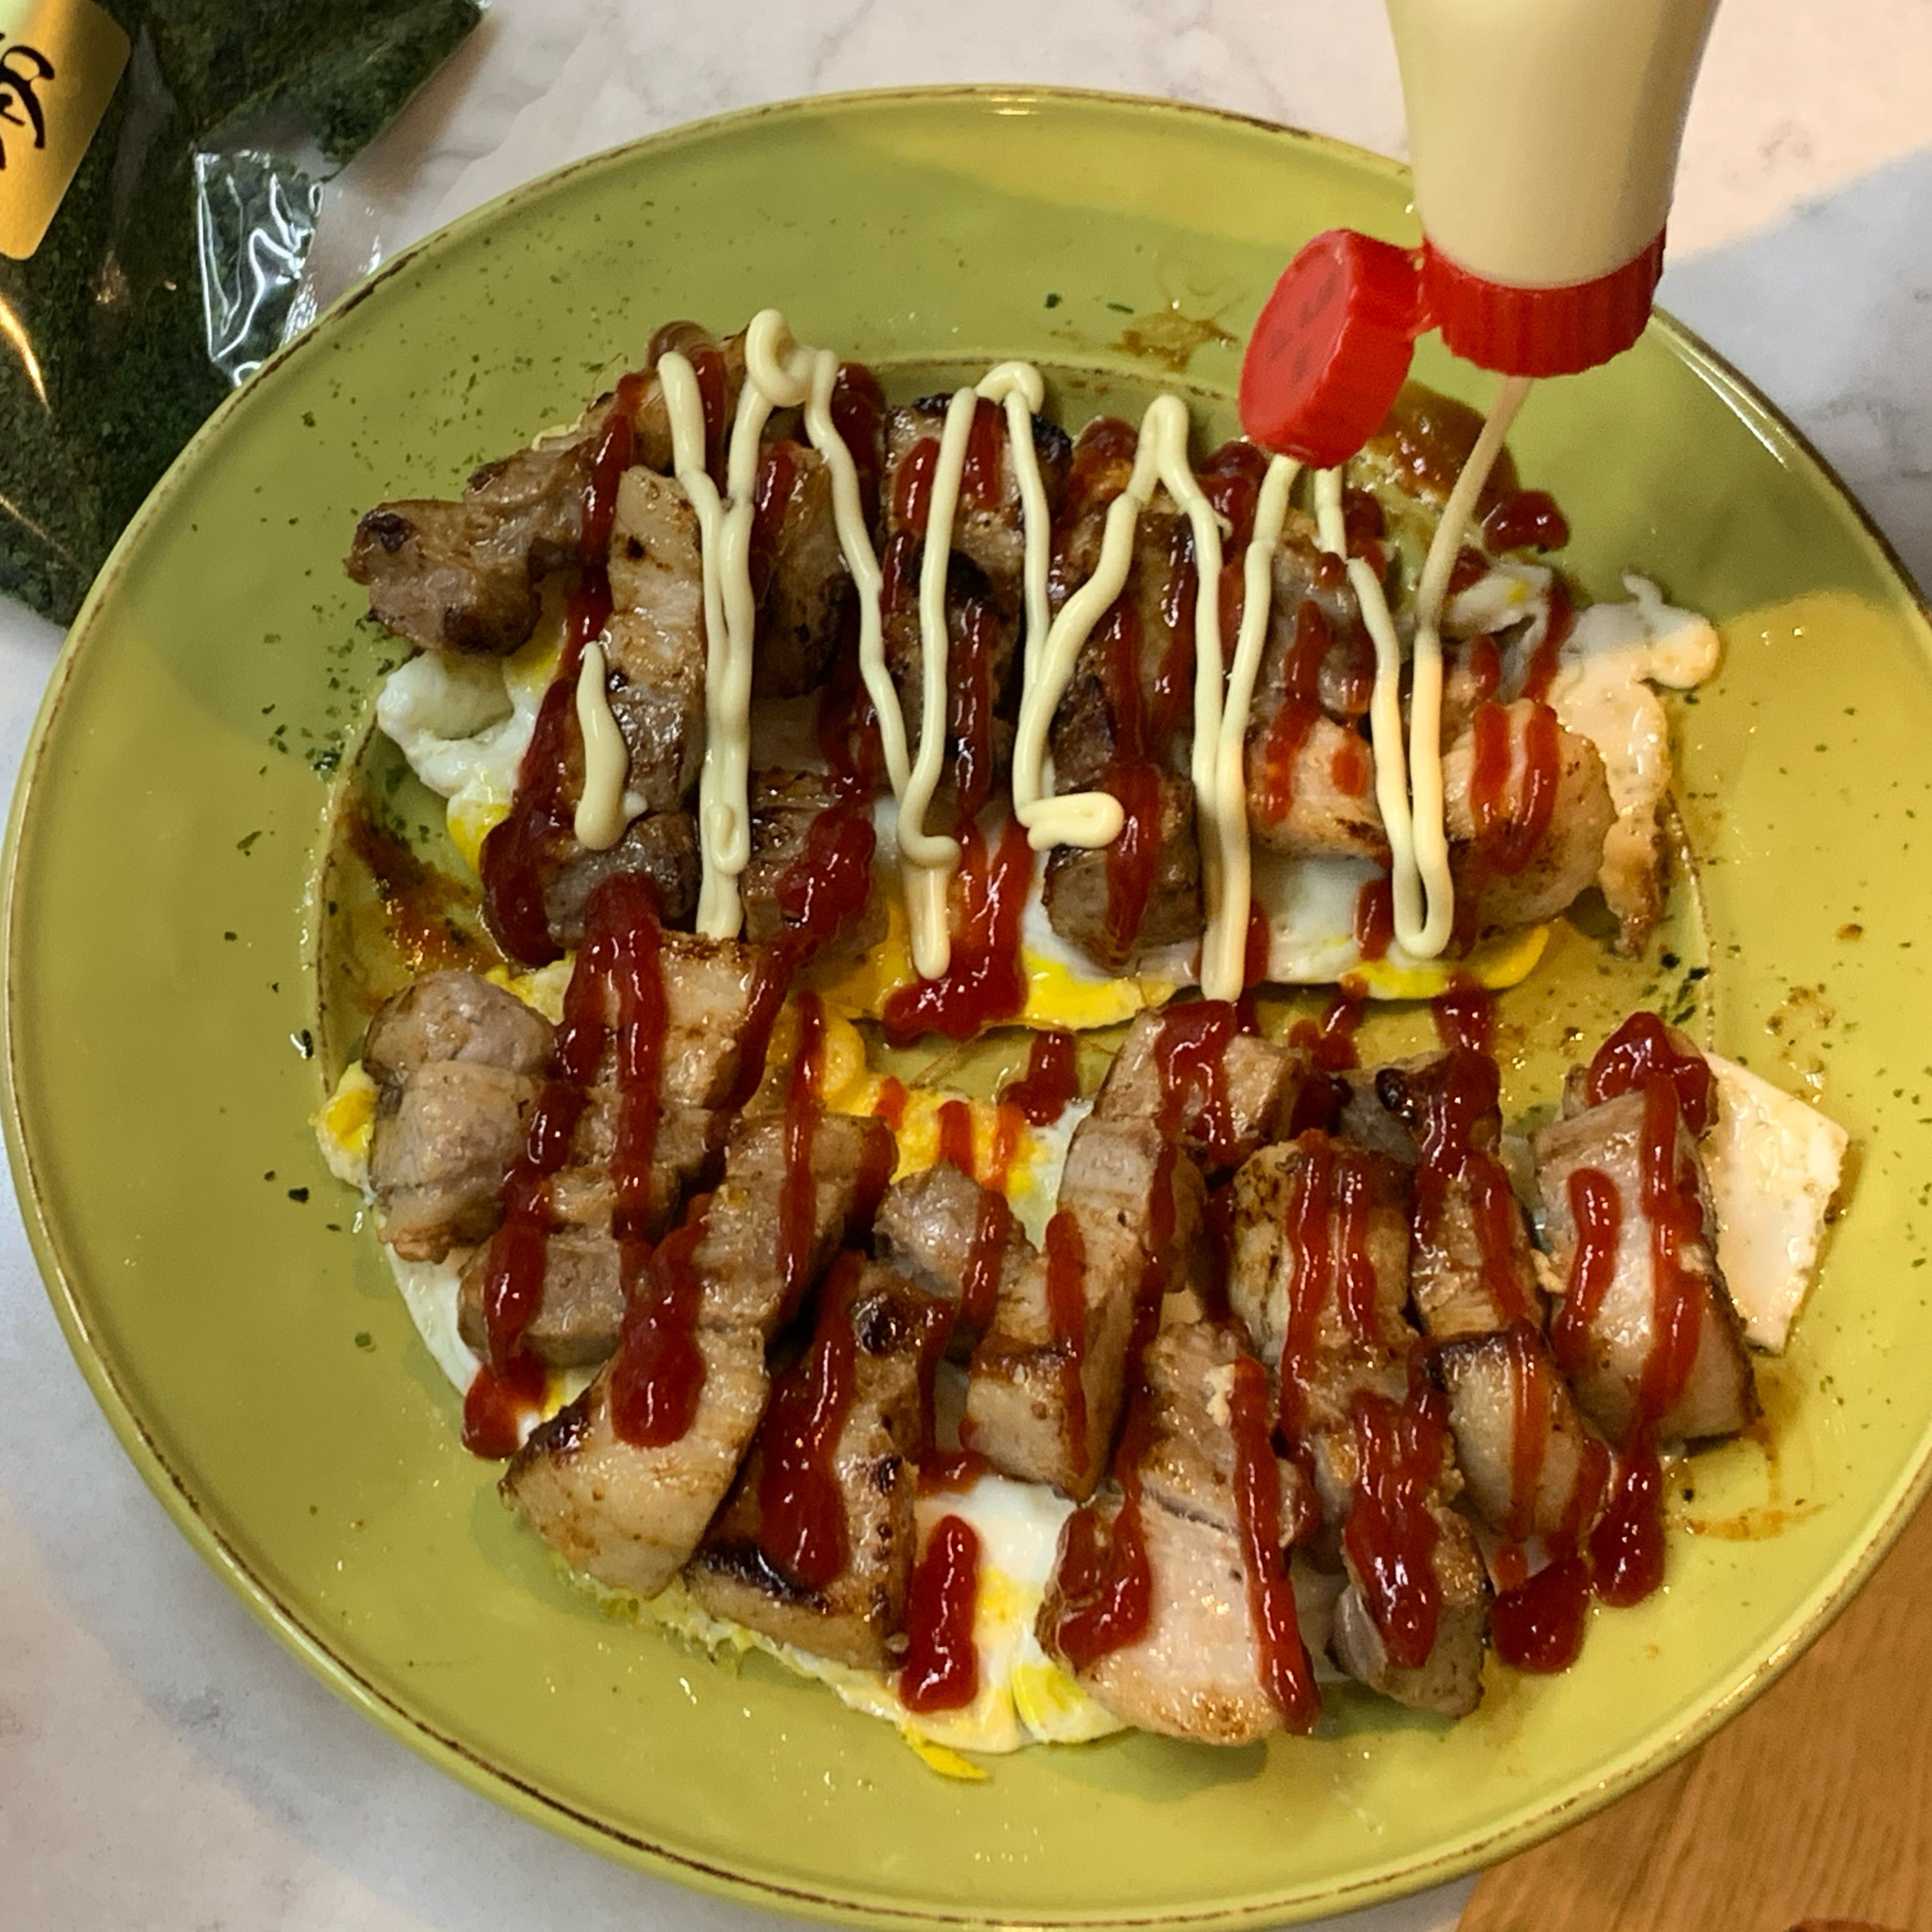 Place the fried eggs at the bottom and then the pork belly. Squeeze the ketchup, mayonnaise and okonomiyaki sauce at your choice. Sprinkle the nori and place a small amount of bonito flake at the top.